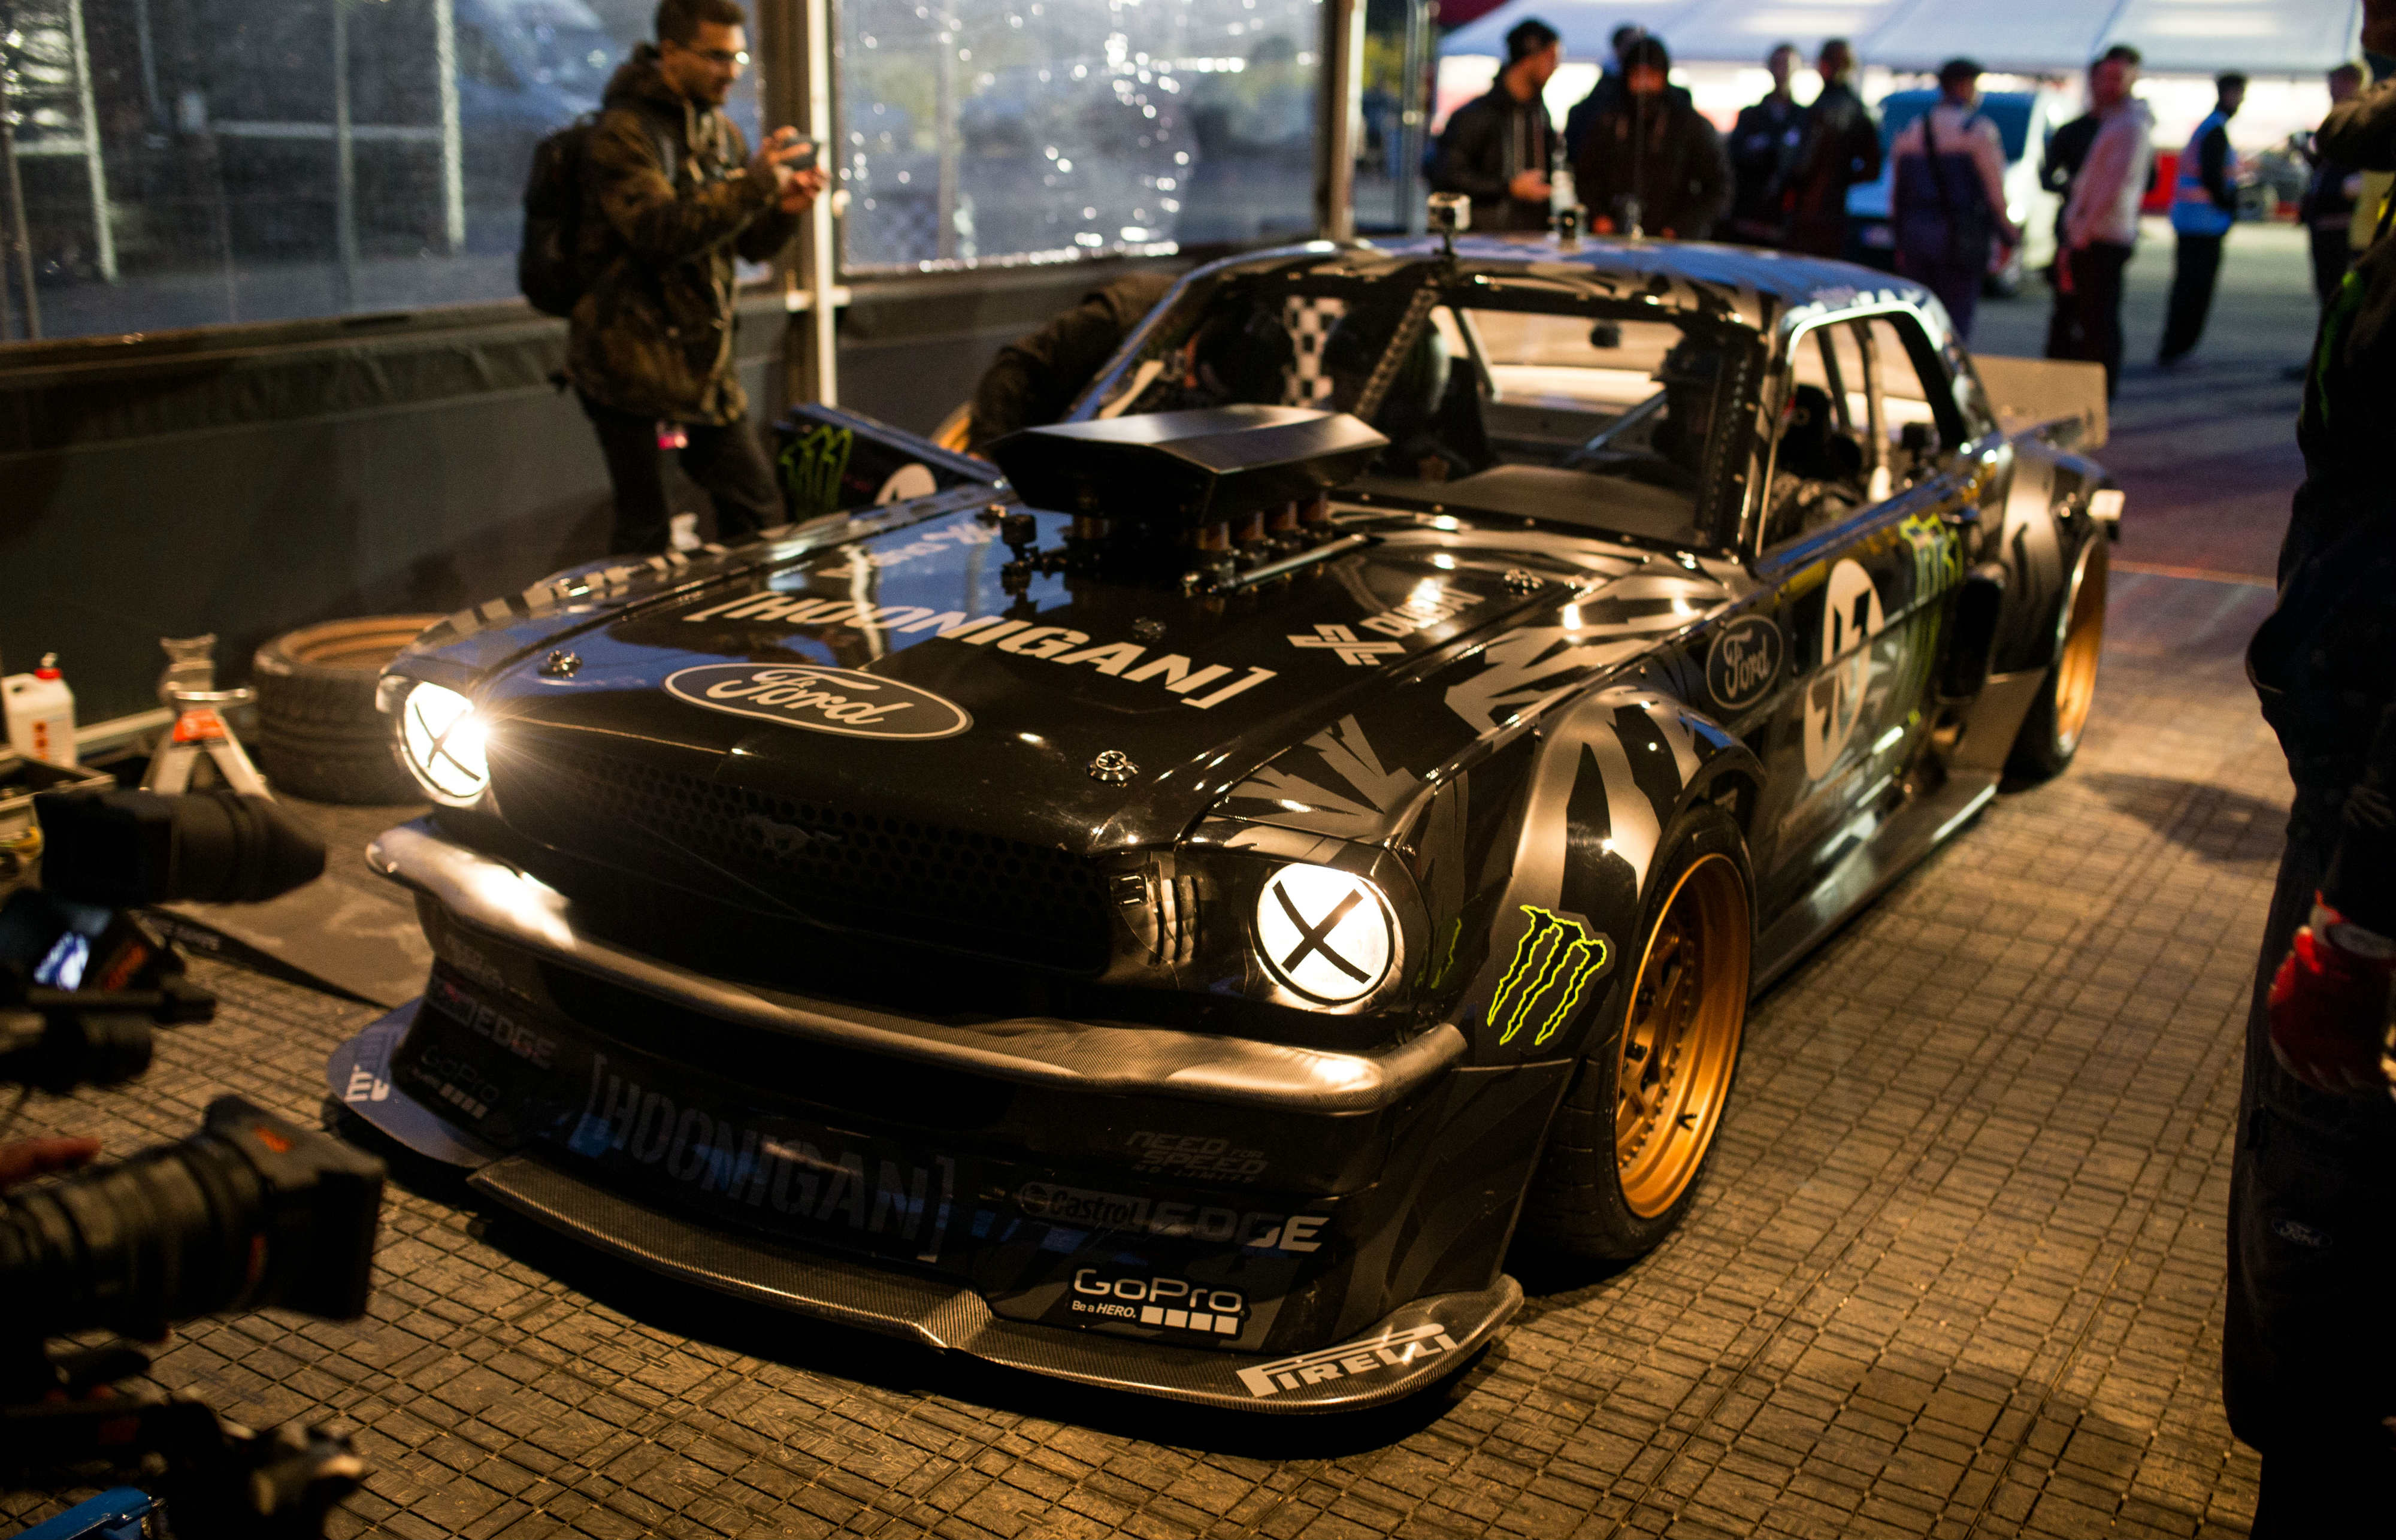 Riding with Ken Block in the 830bhp Ford Mustang Hoonicorn